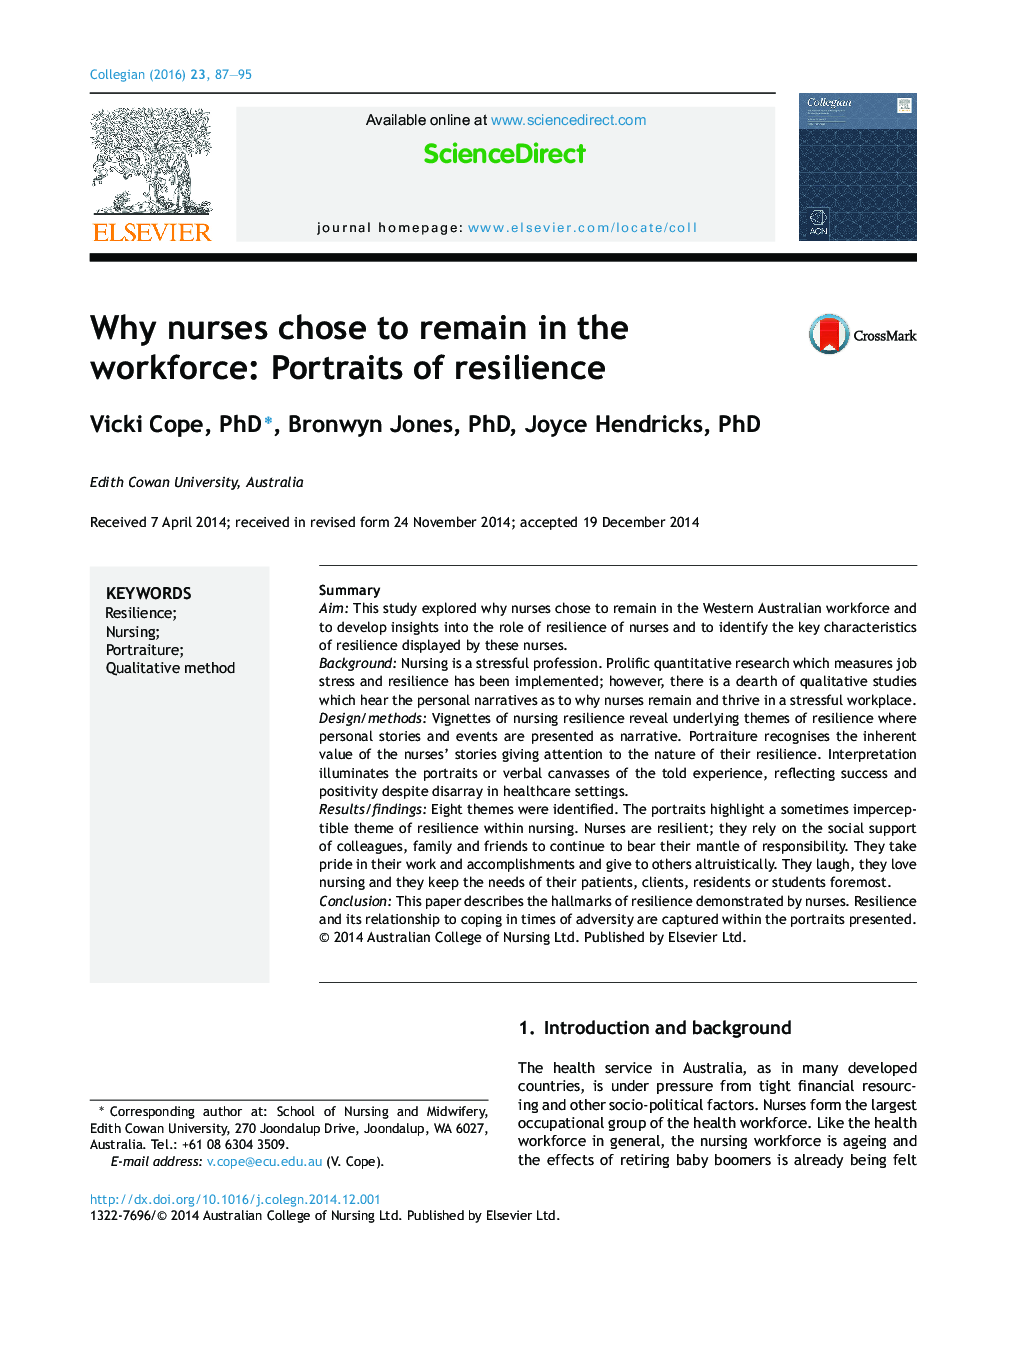 Why nurses chose to remain in the workforce: Portraits of resilience